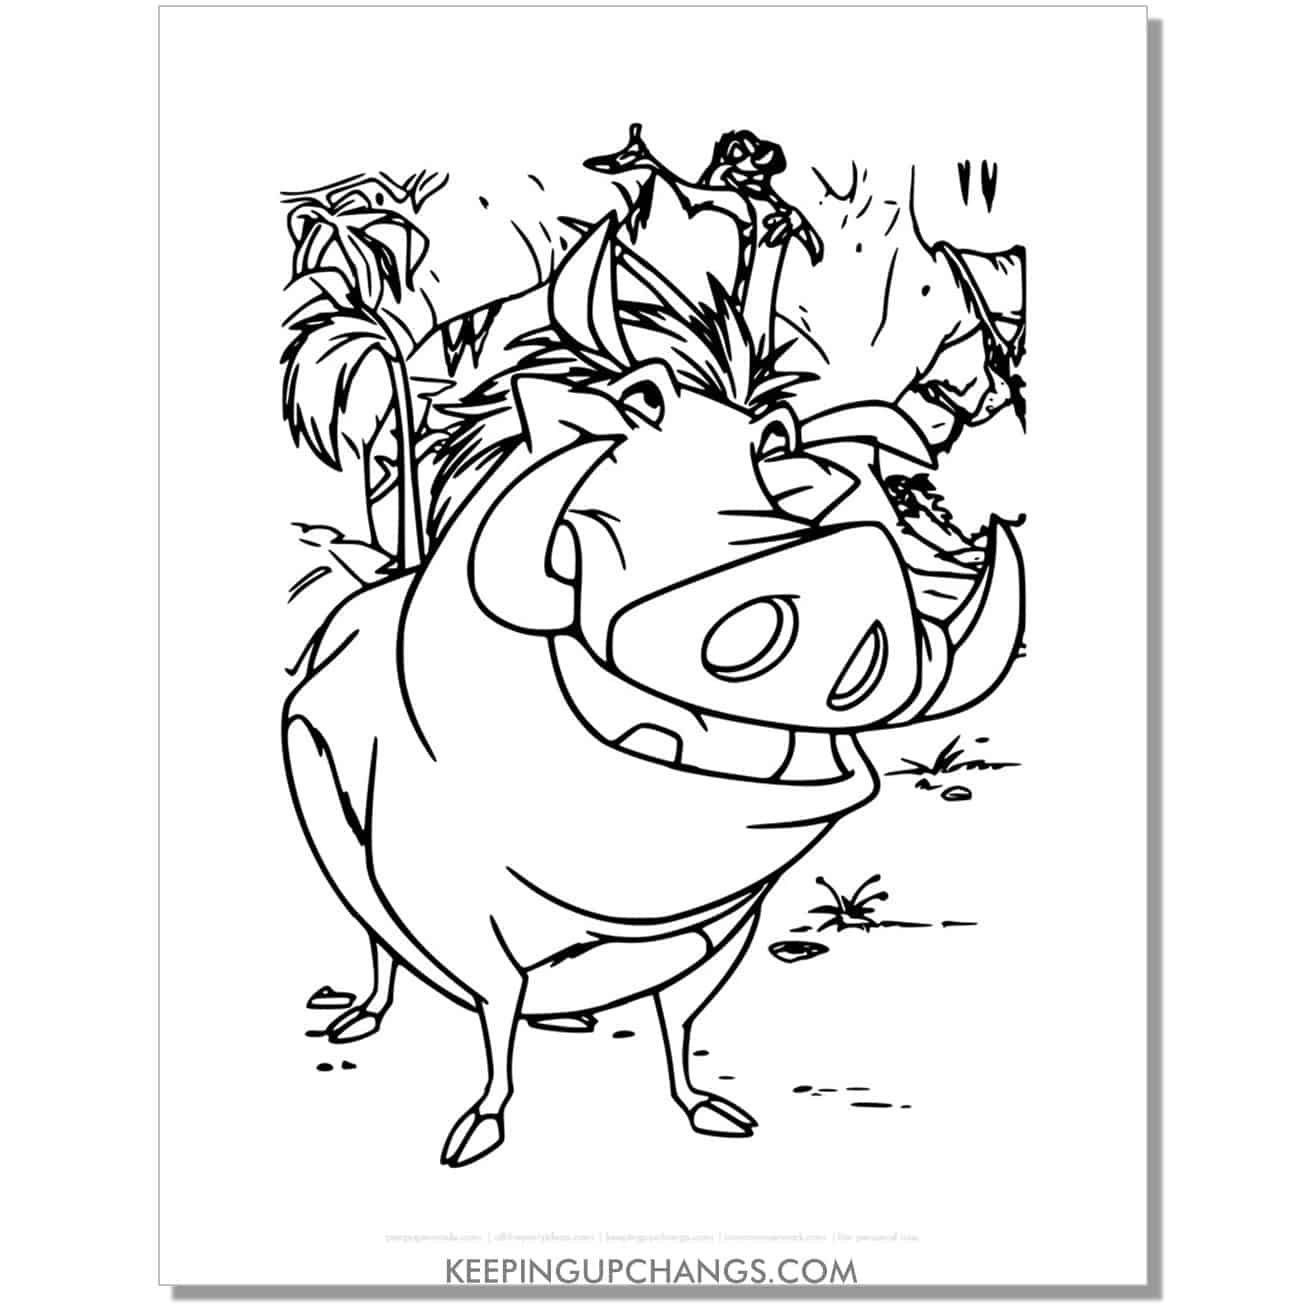 timon on pumbaa's head lion king coloring page, sheet.